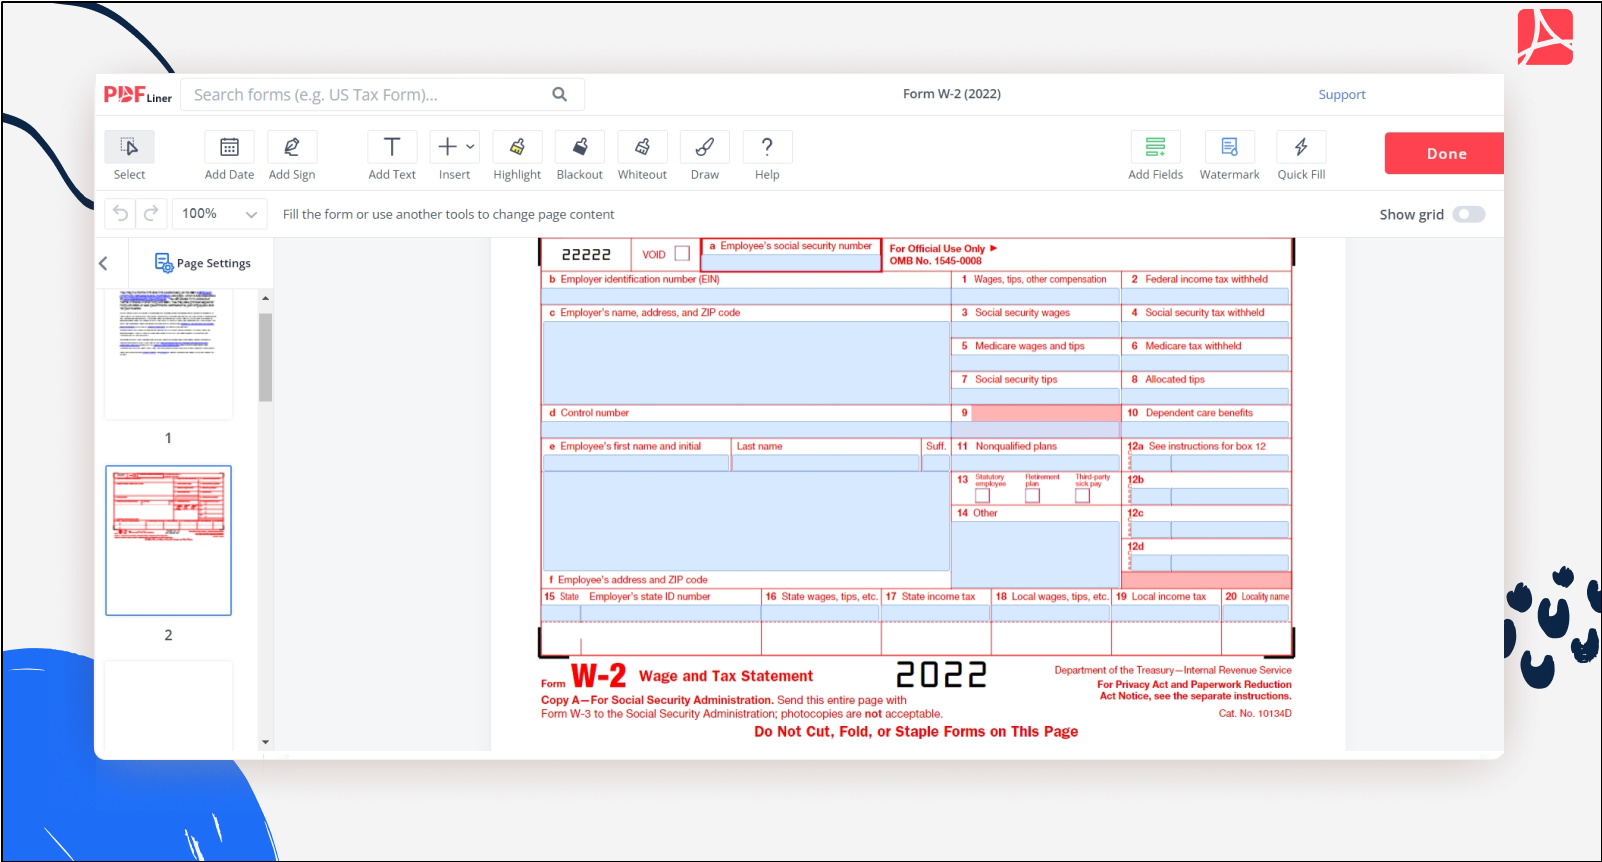 Form W-2 (2022): Printable Form W-2, Sign Forms Online | Pdfliner pertaining to W2 Fillable Form 2022